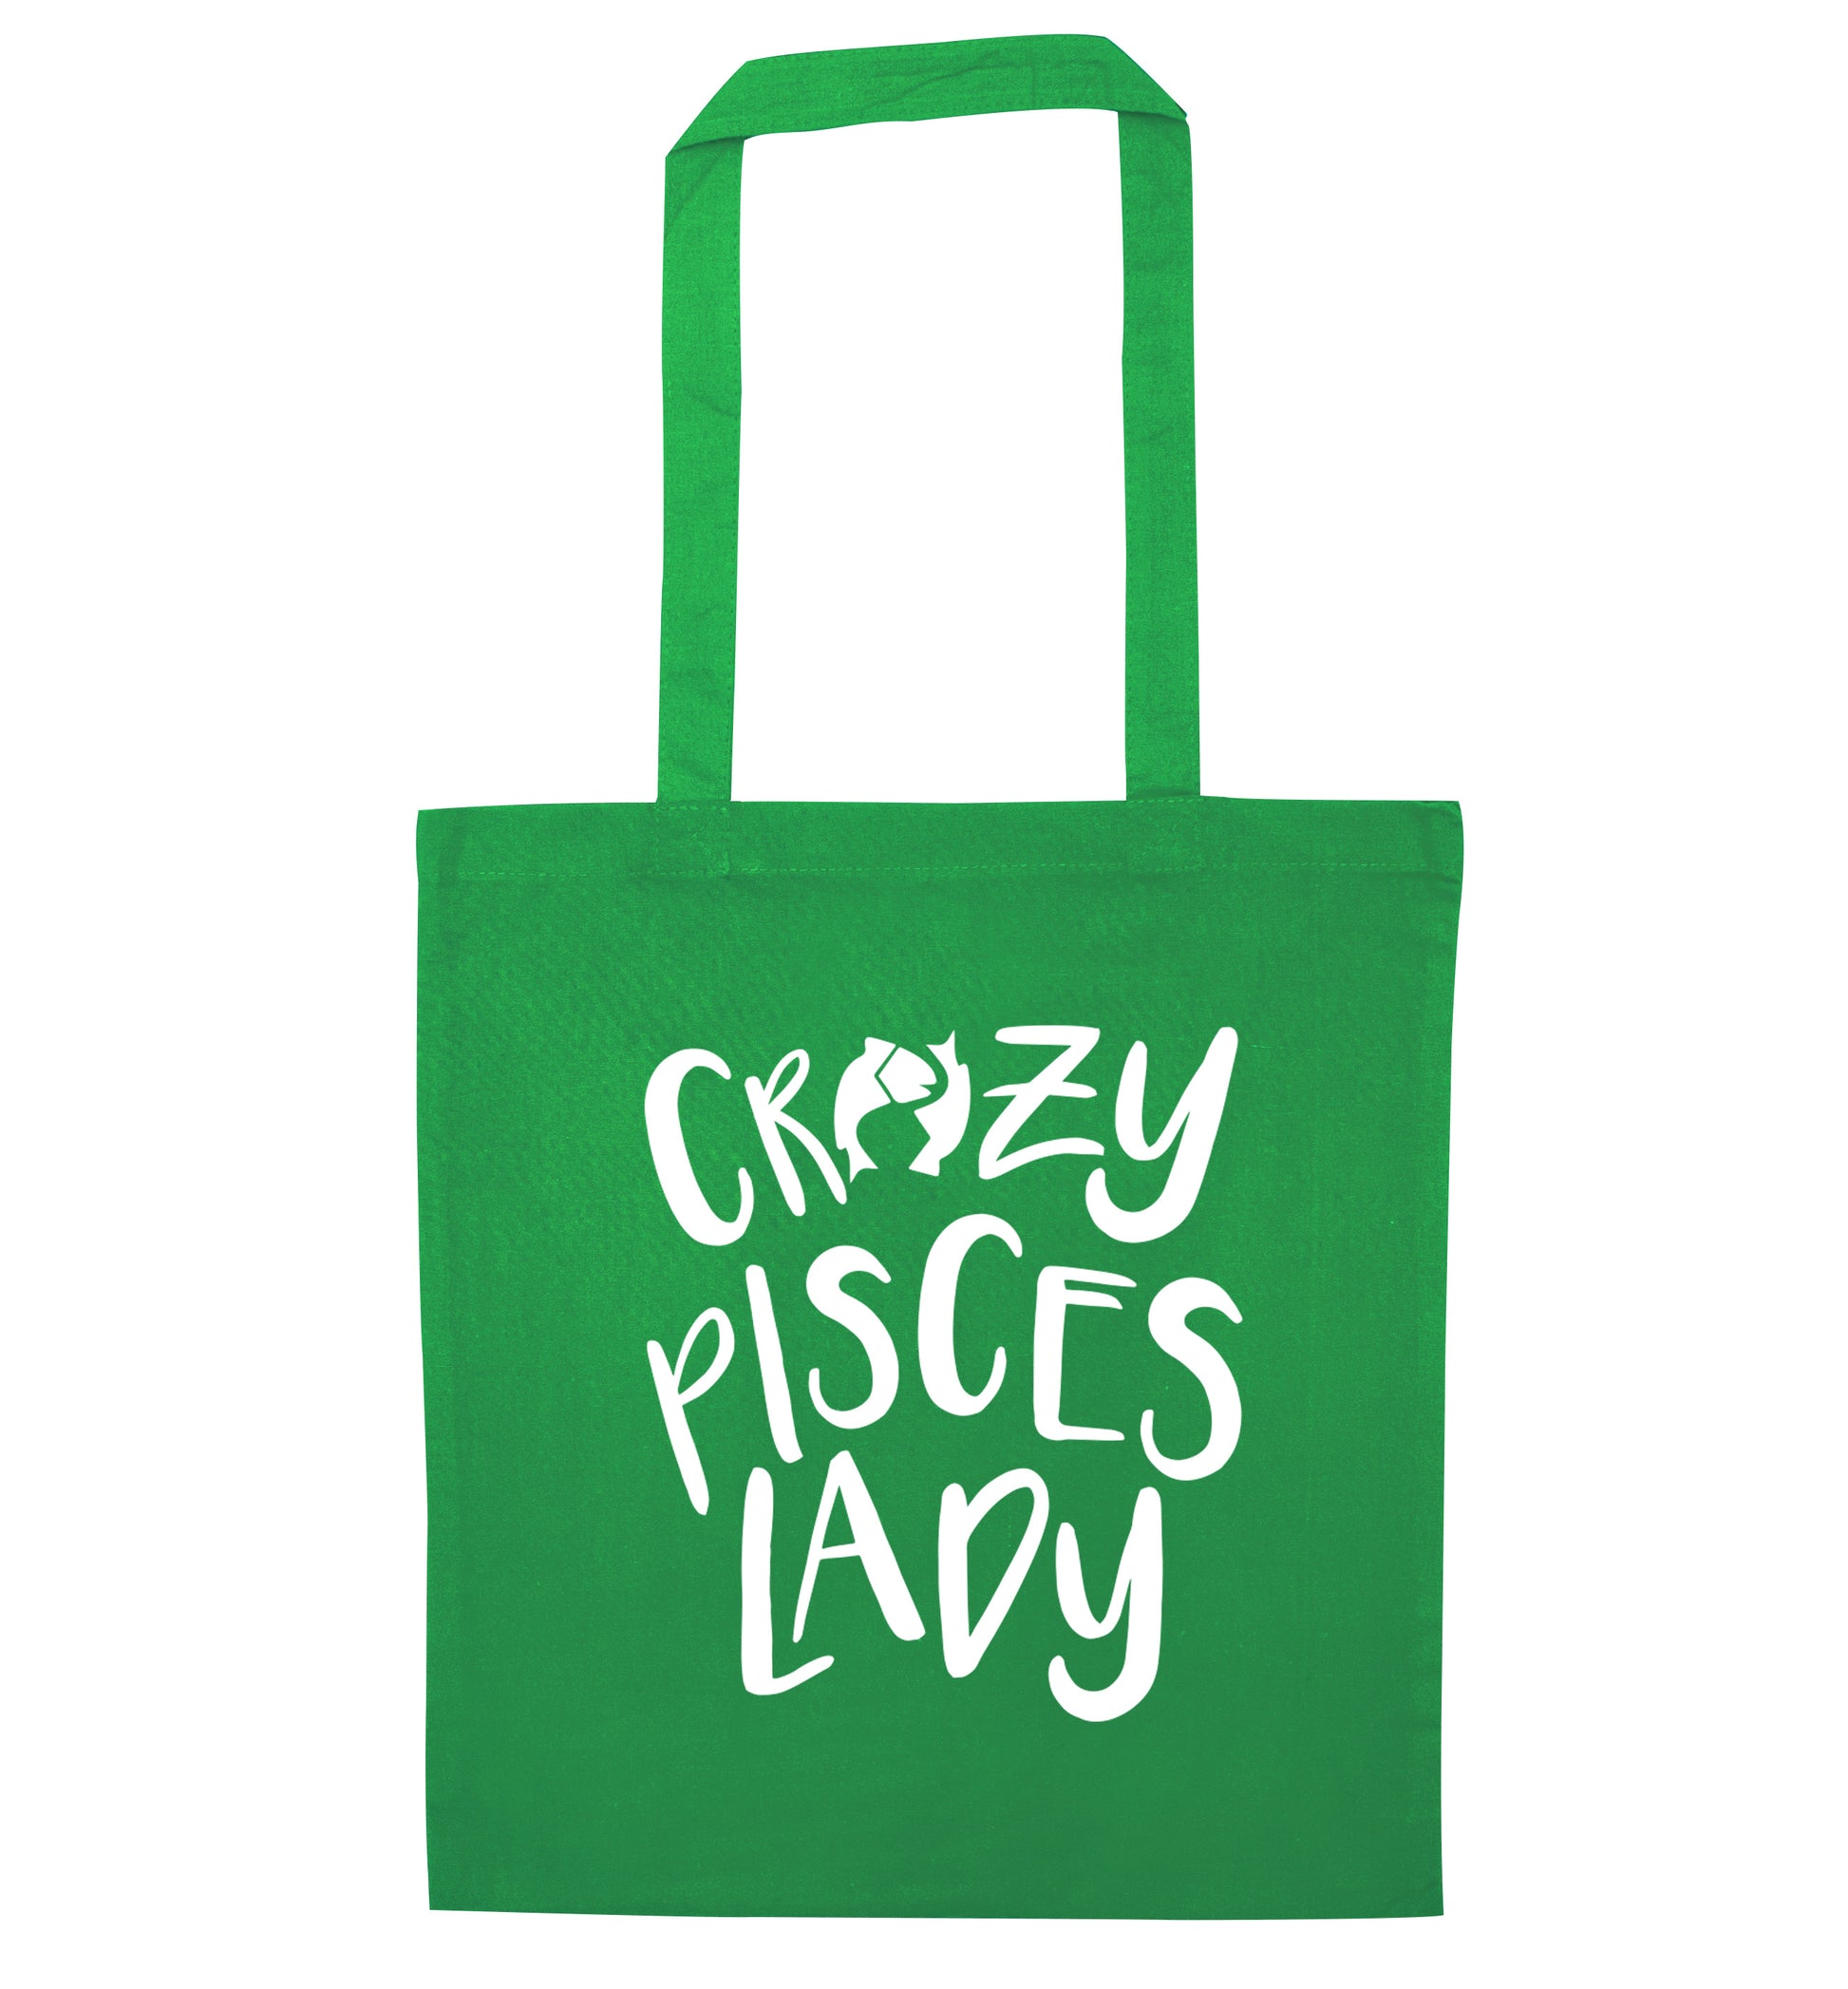 Crazy pisces Lady green tote bag